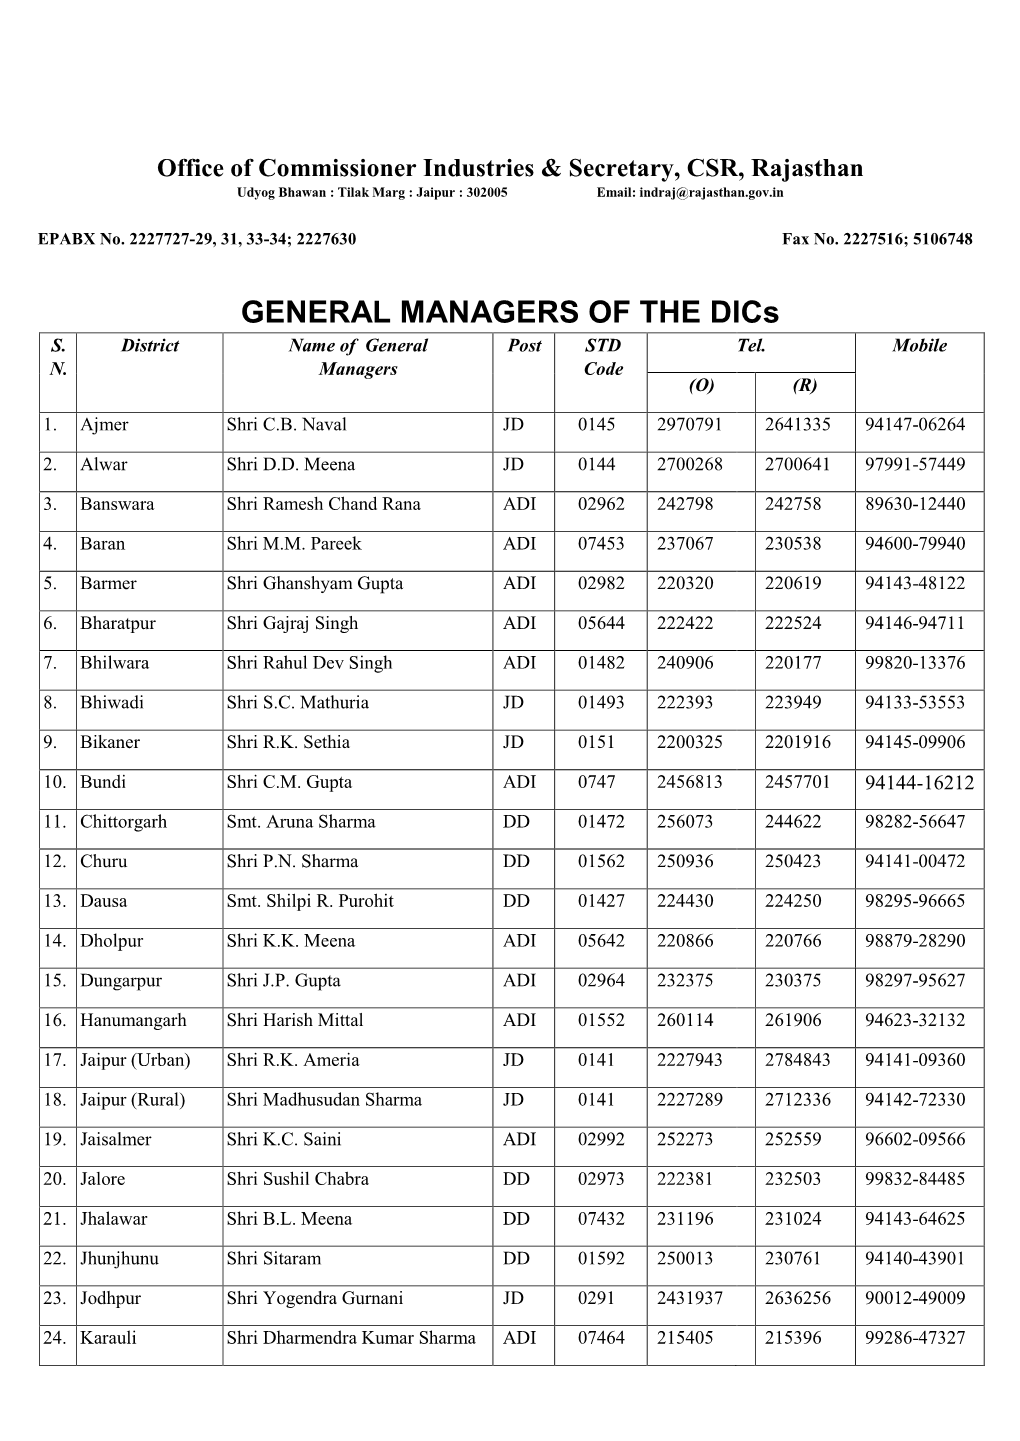 Contact Numbers of Officers of Industries Department